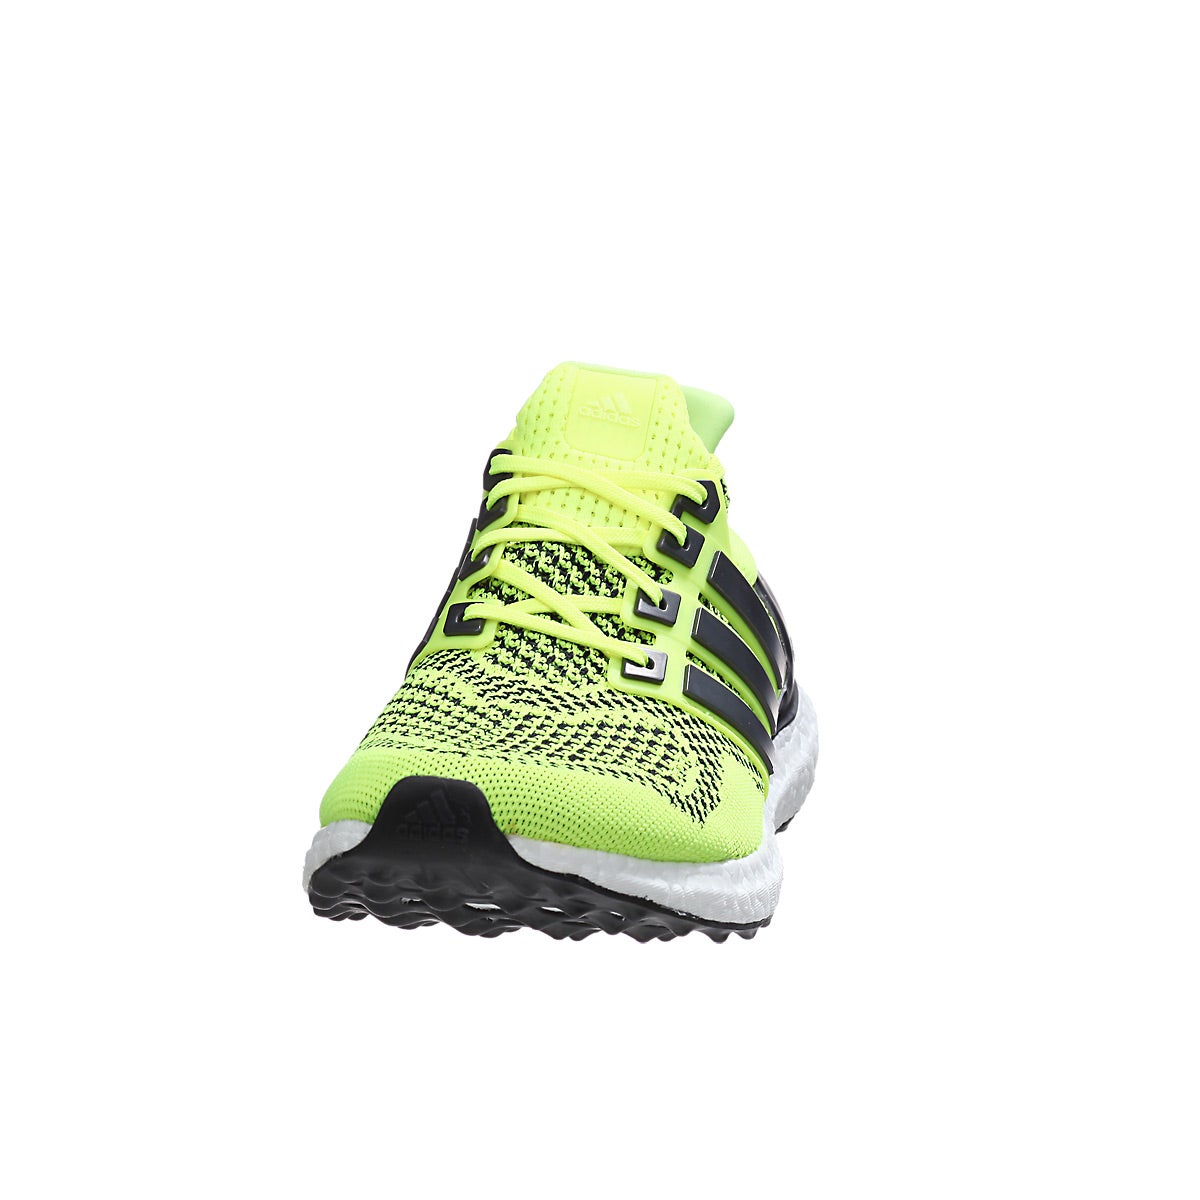 adidas Ultra Boost Men's Shoes Yellow 